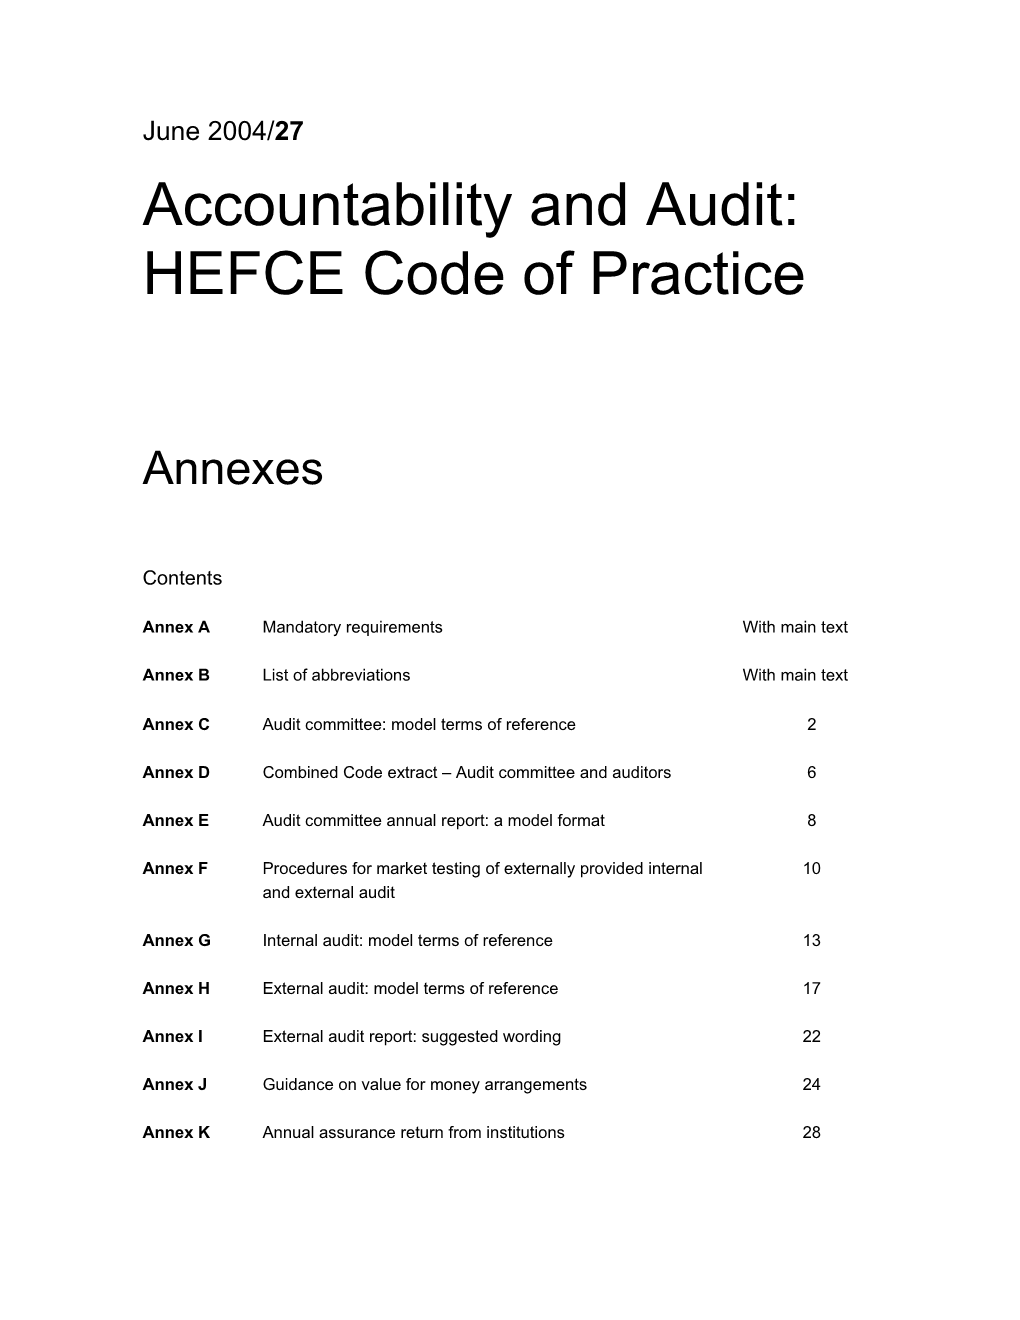 Accountability and Audit: HEFCE Code of Practice Annexes